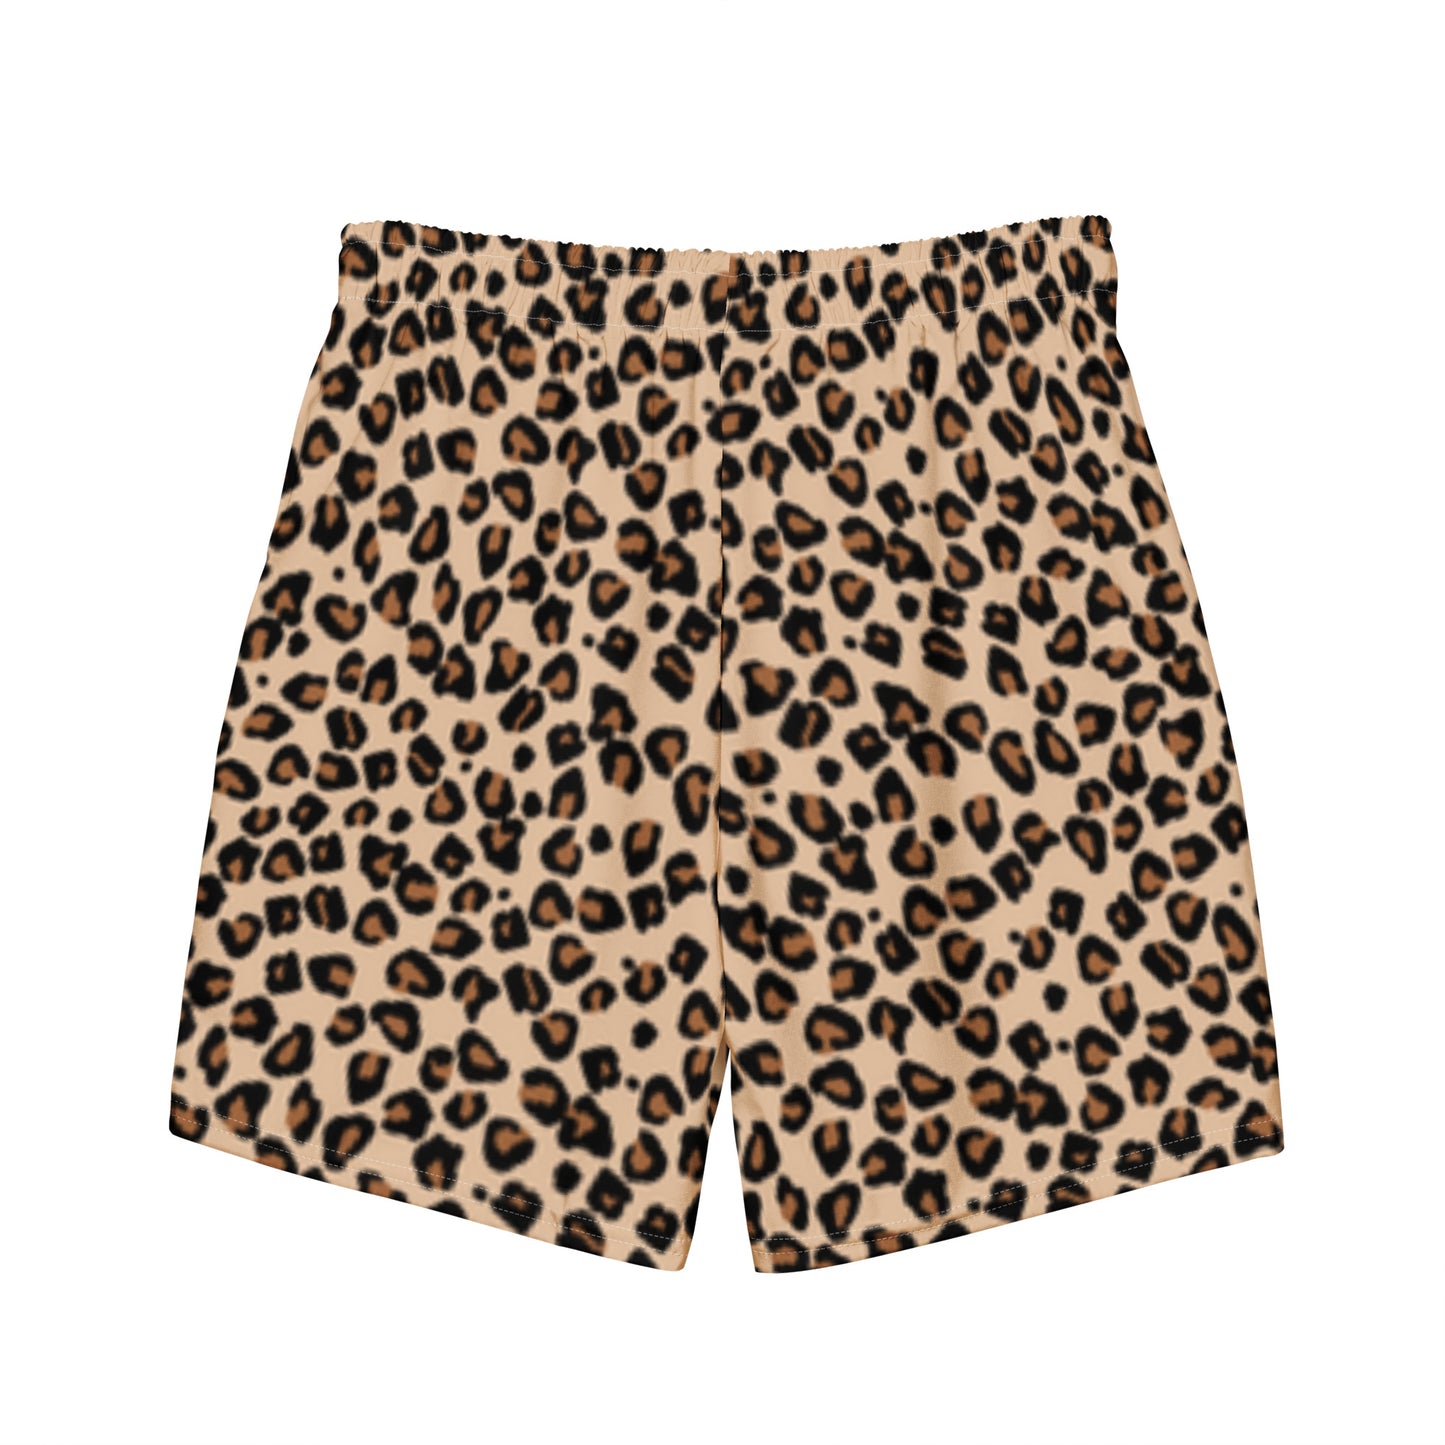 All-Over Print Recycled Swim Shorts: Leopard